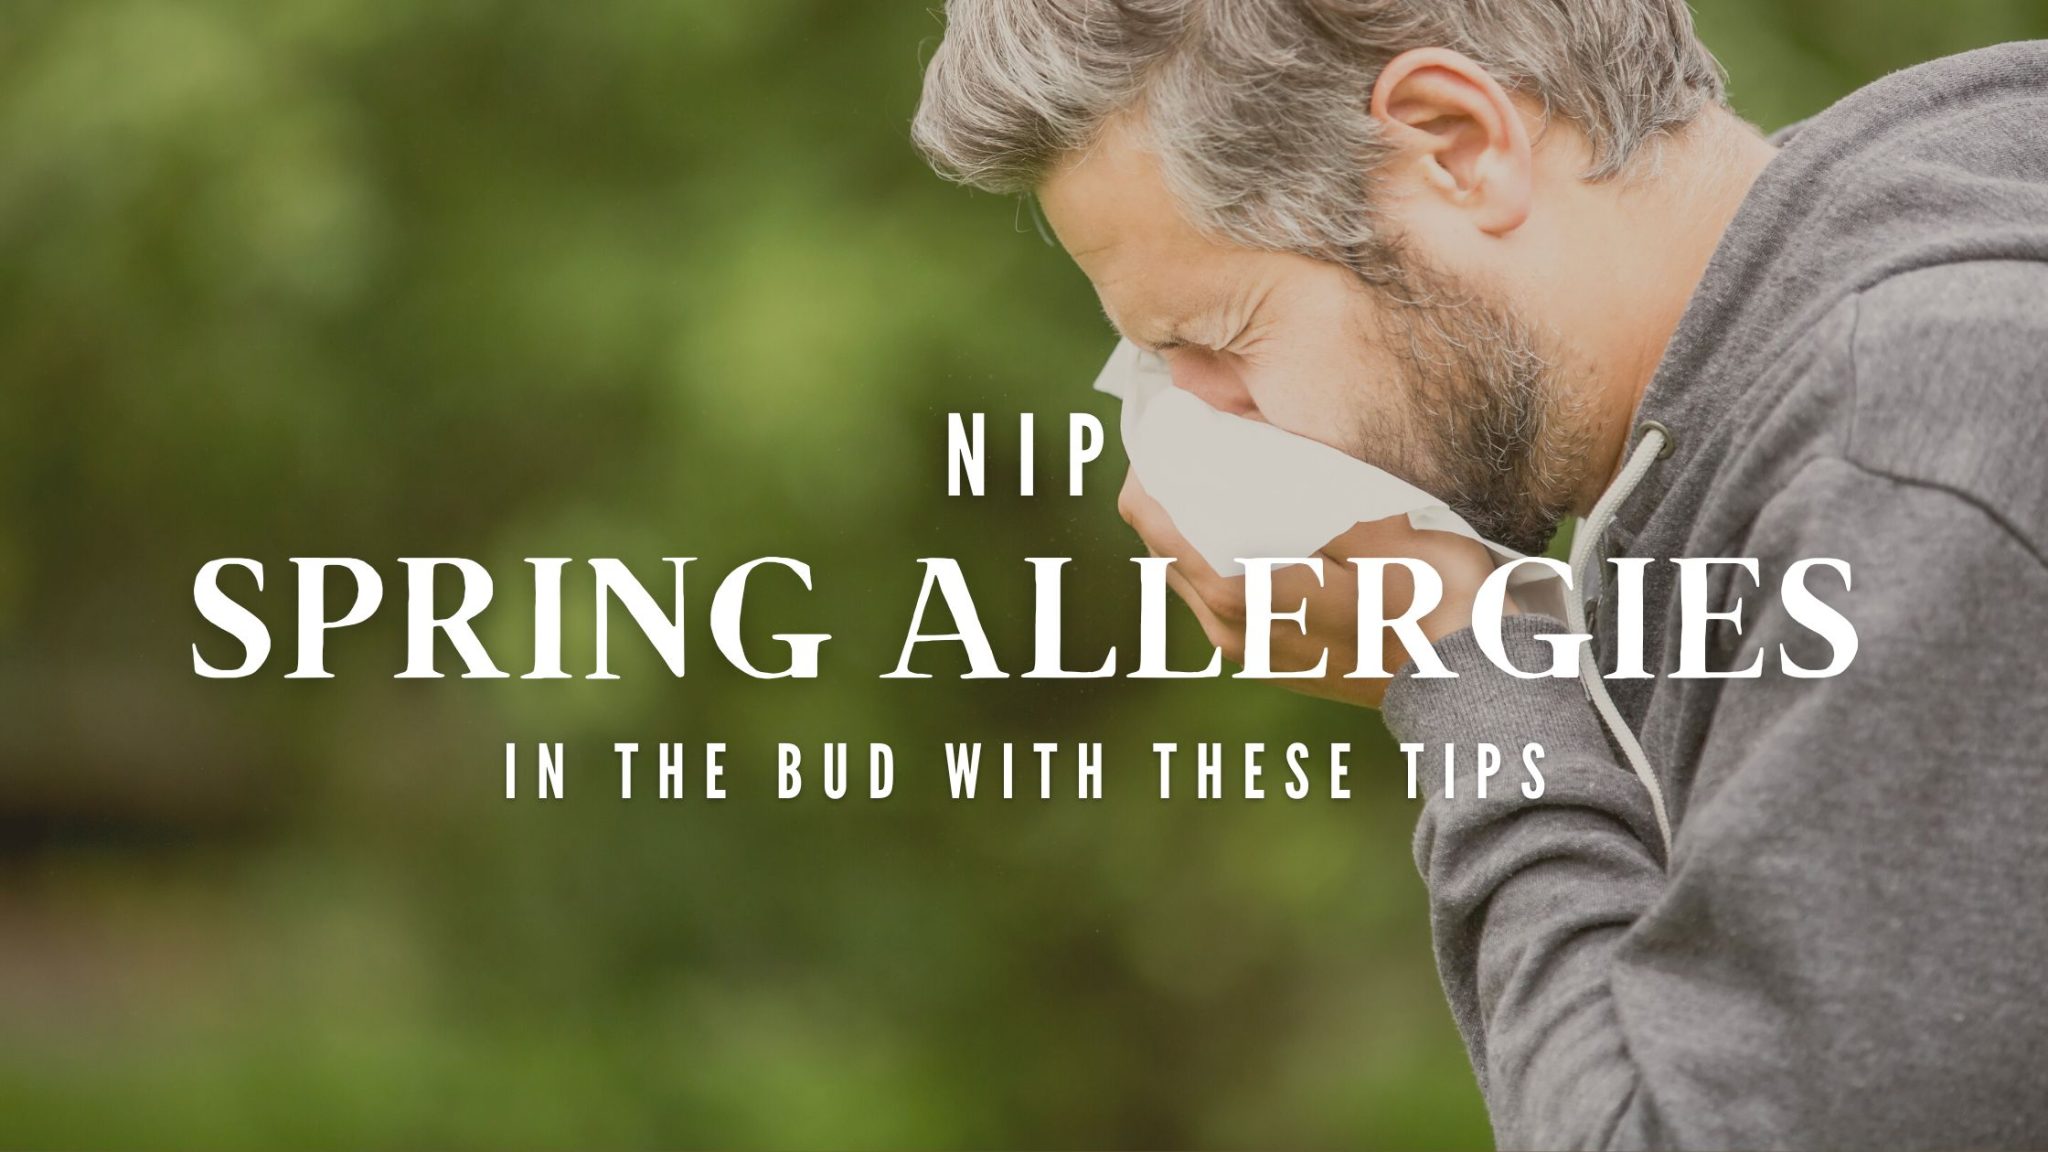 Nip Spring Allergies In The Bud With These 4 Tips